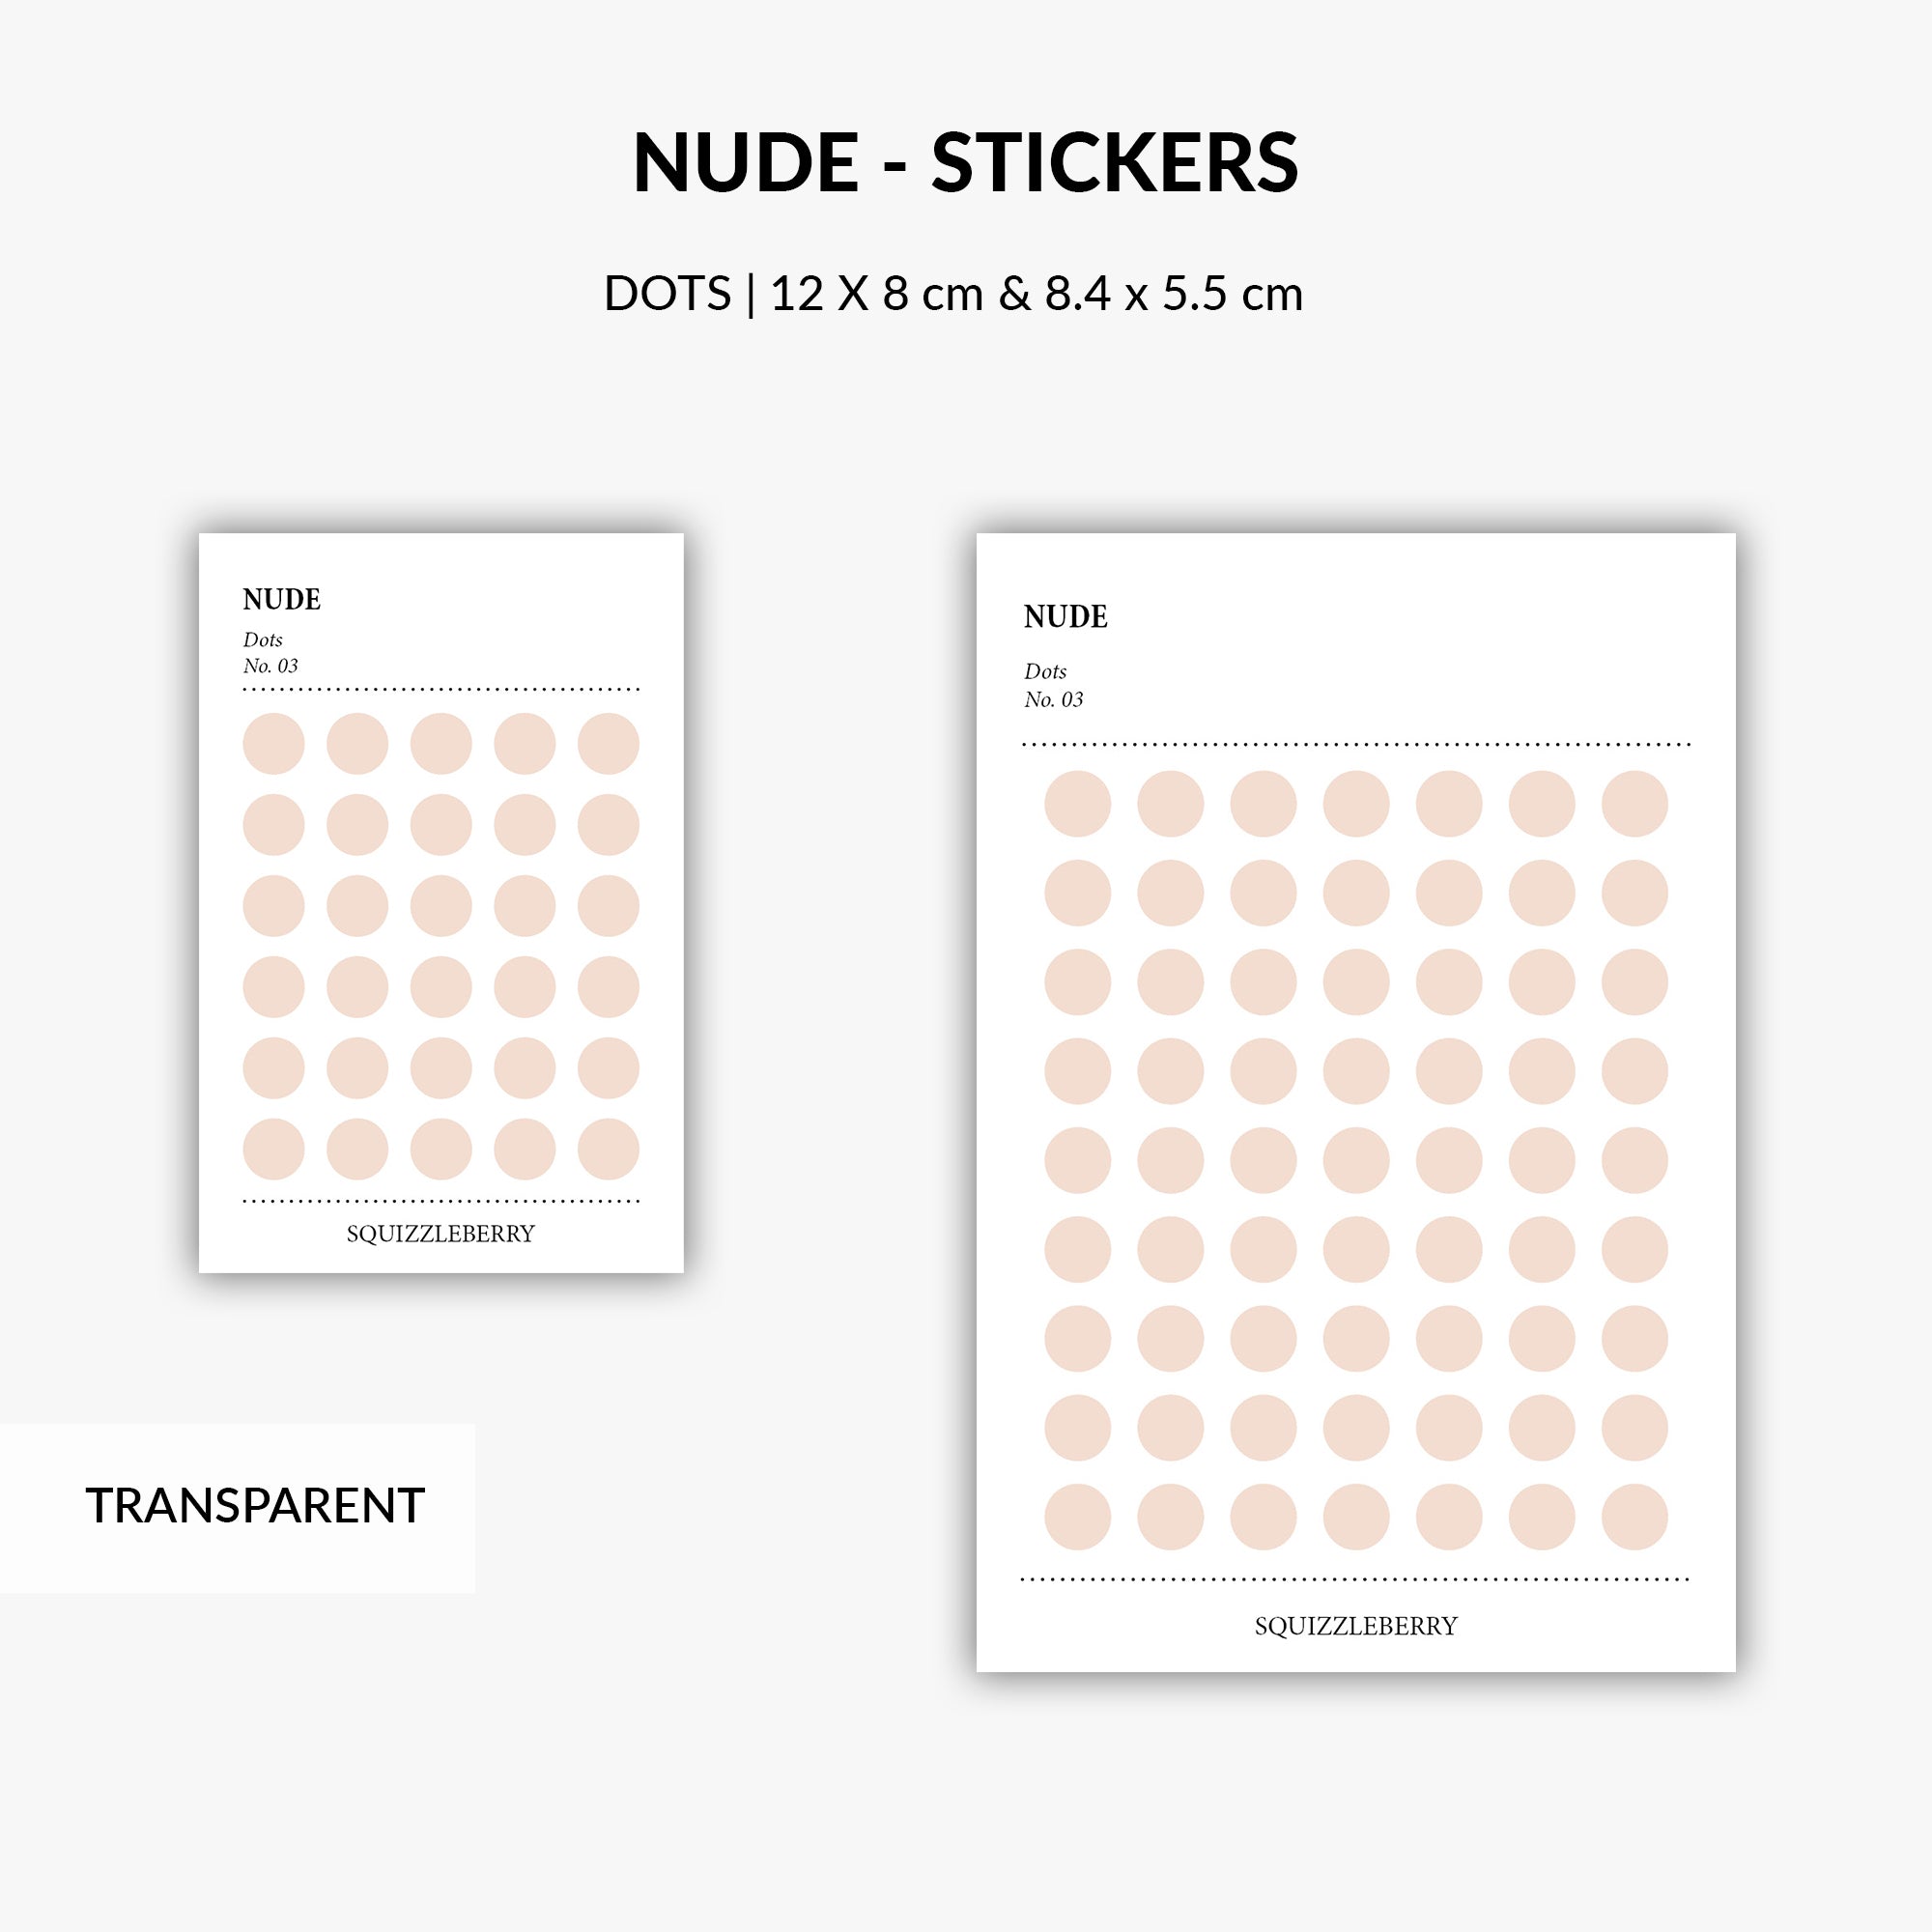 Nude - Dots - Stickers – SquizzleBerry